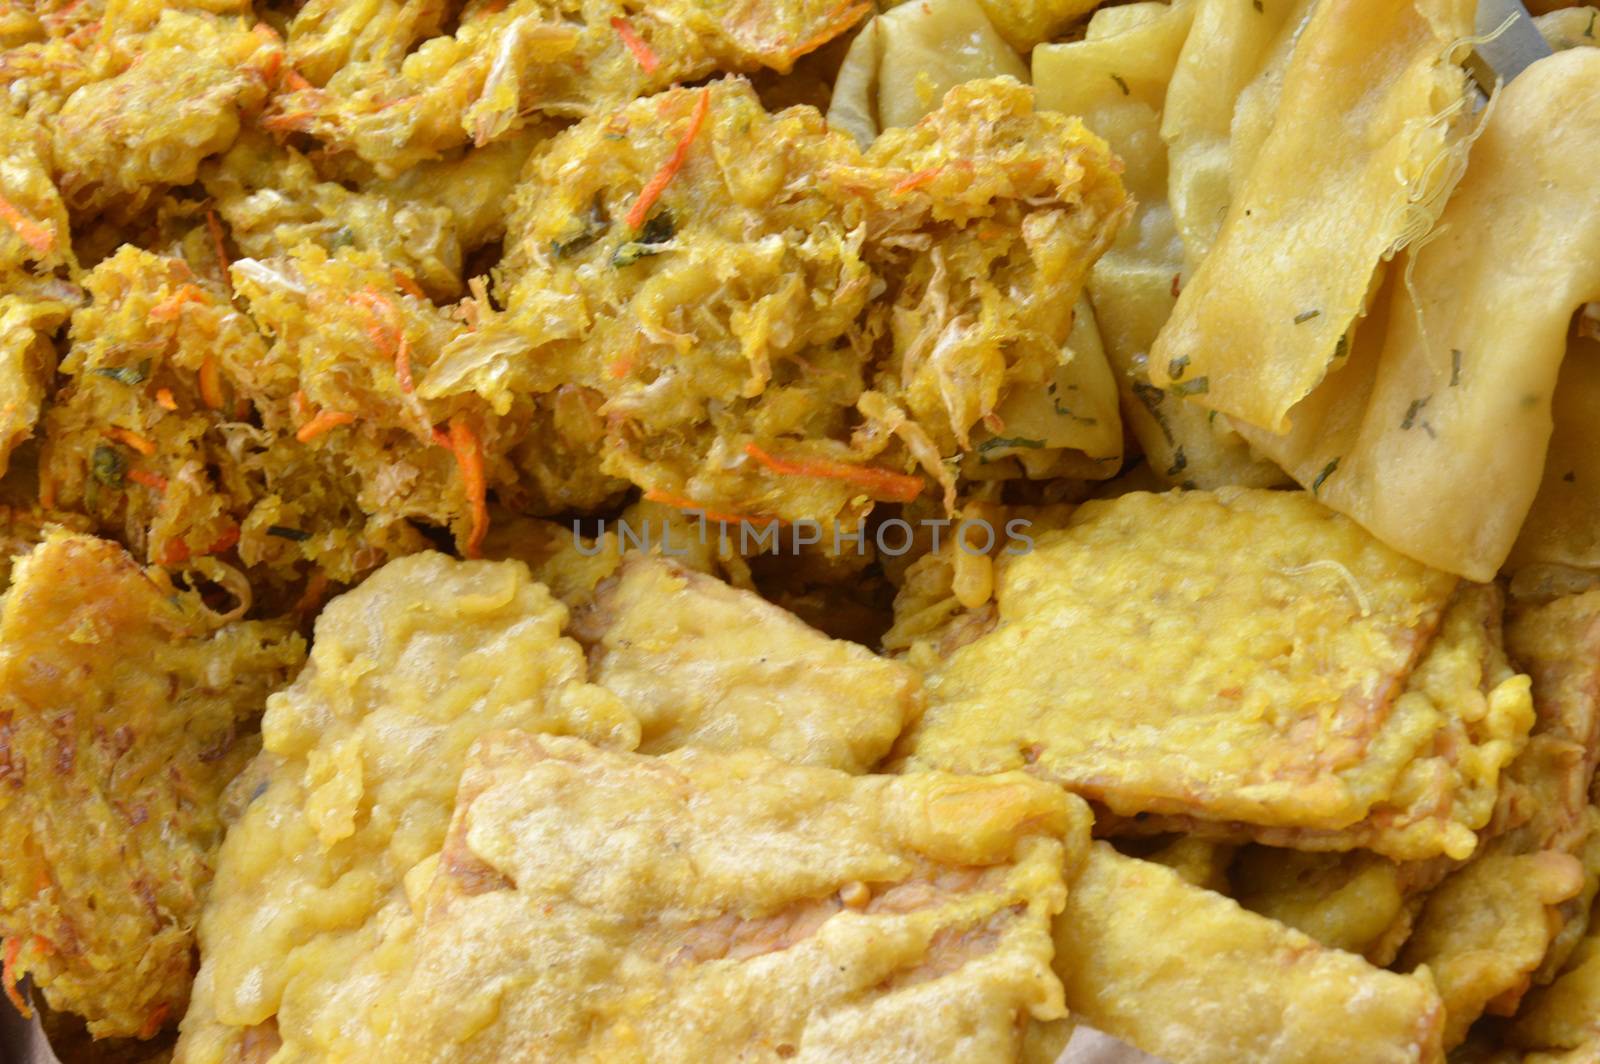 tempeh and tofu fried, Indonesian traditional snack